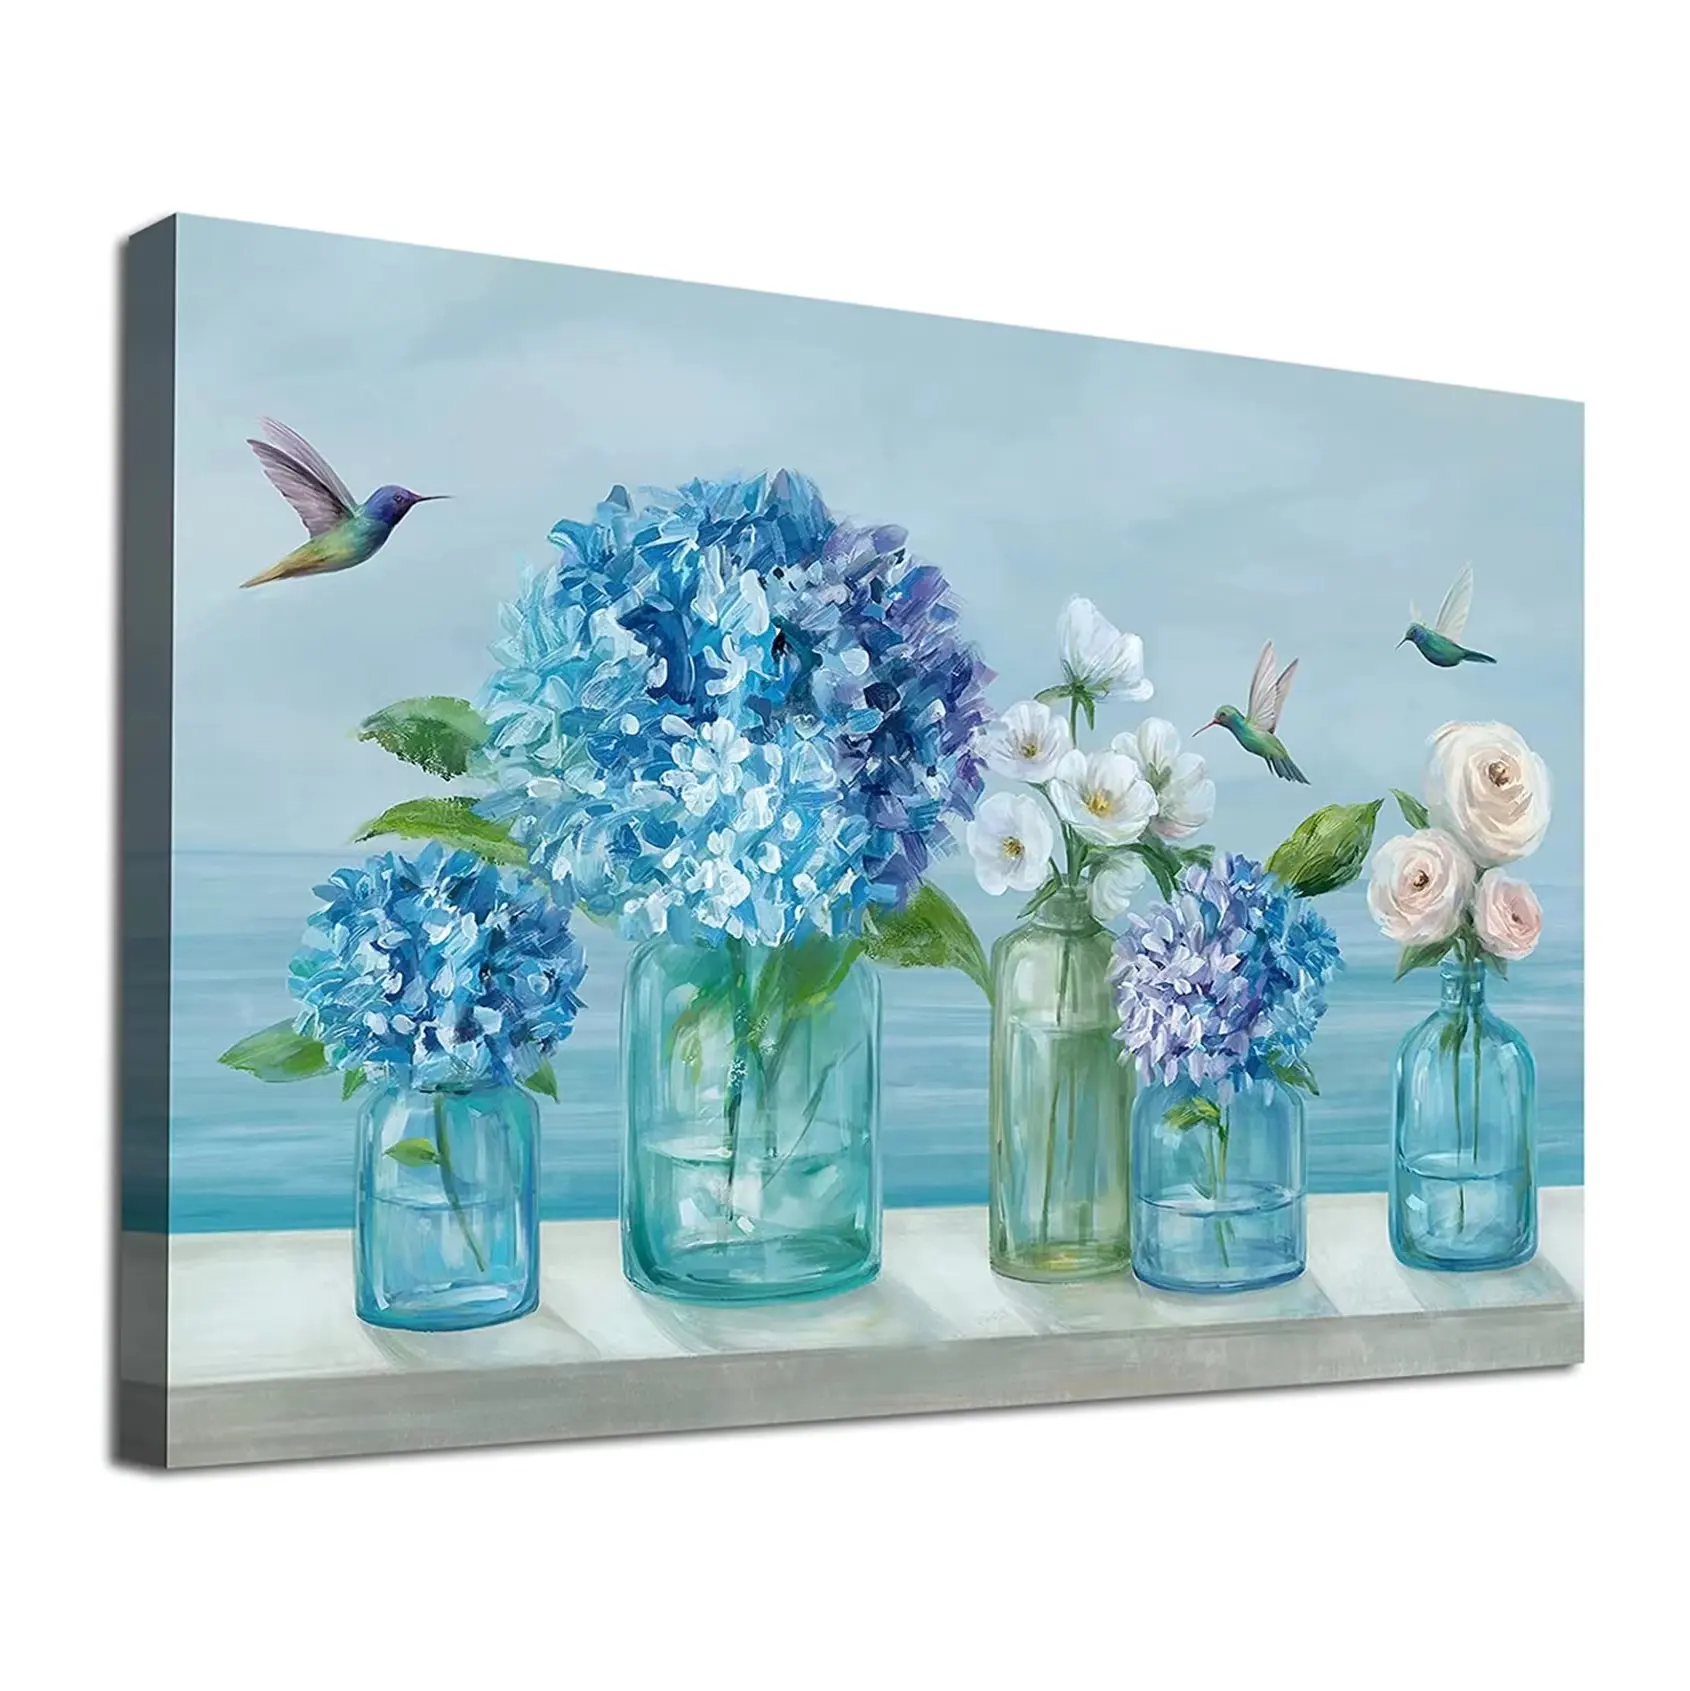 Flowers Wall Art Canvas Rose Hydrangea Canvas Painting Wall Art Blue Painting Contemporary Artwork Living Room Bedroom